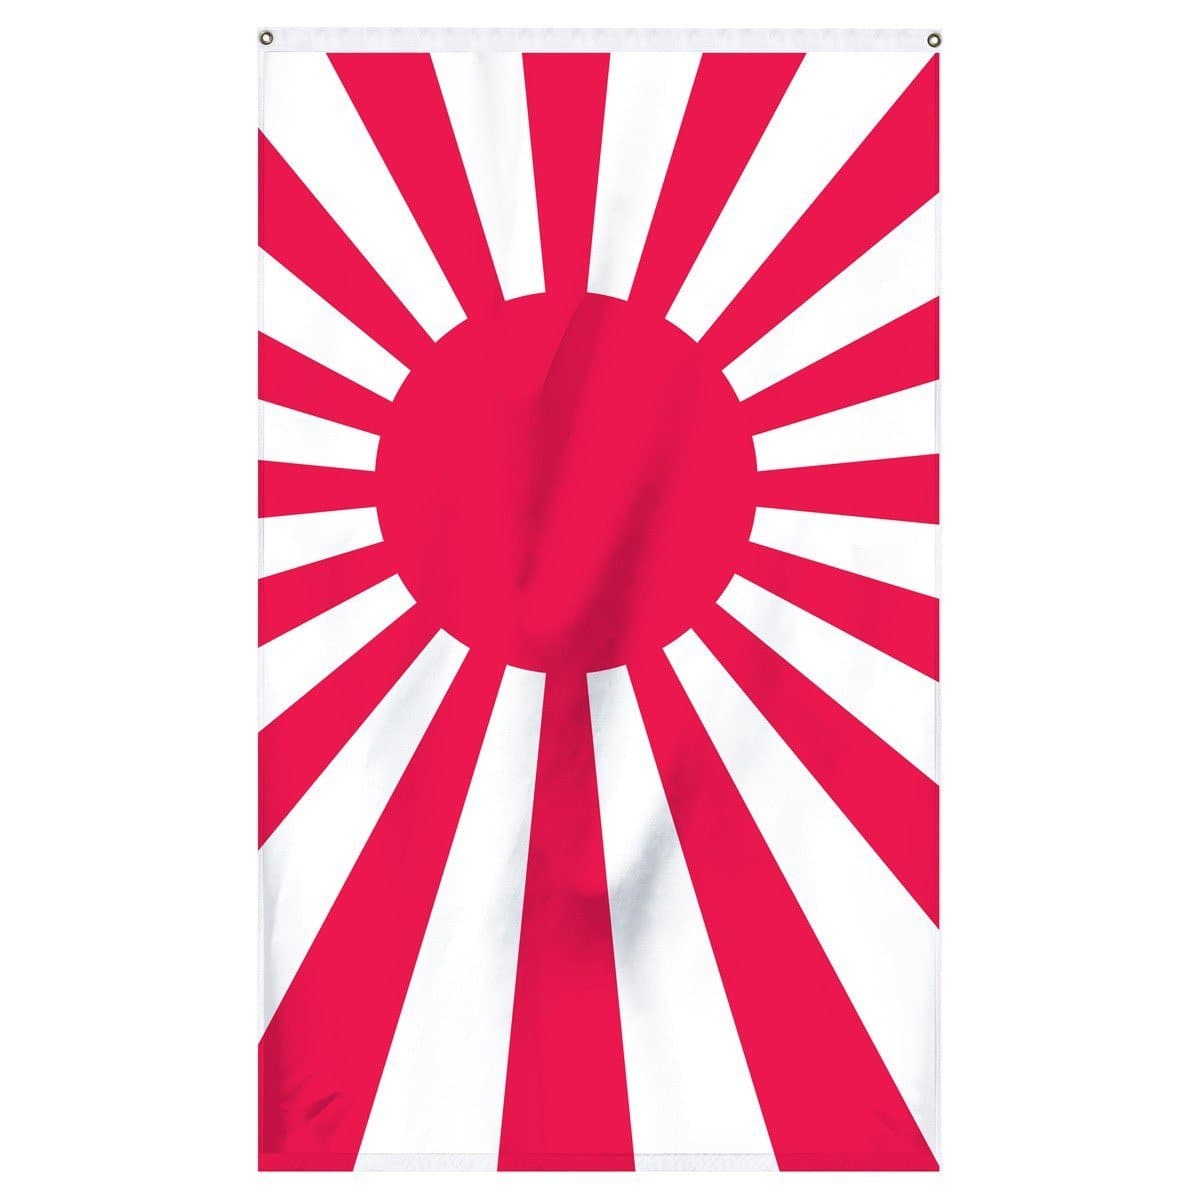 Japan Rising Sun flag for sale online for flagpoles, collectors, or pride parades.